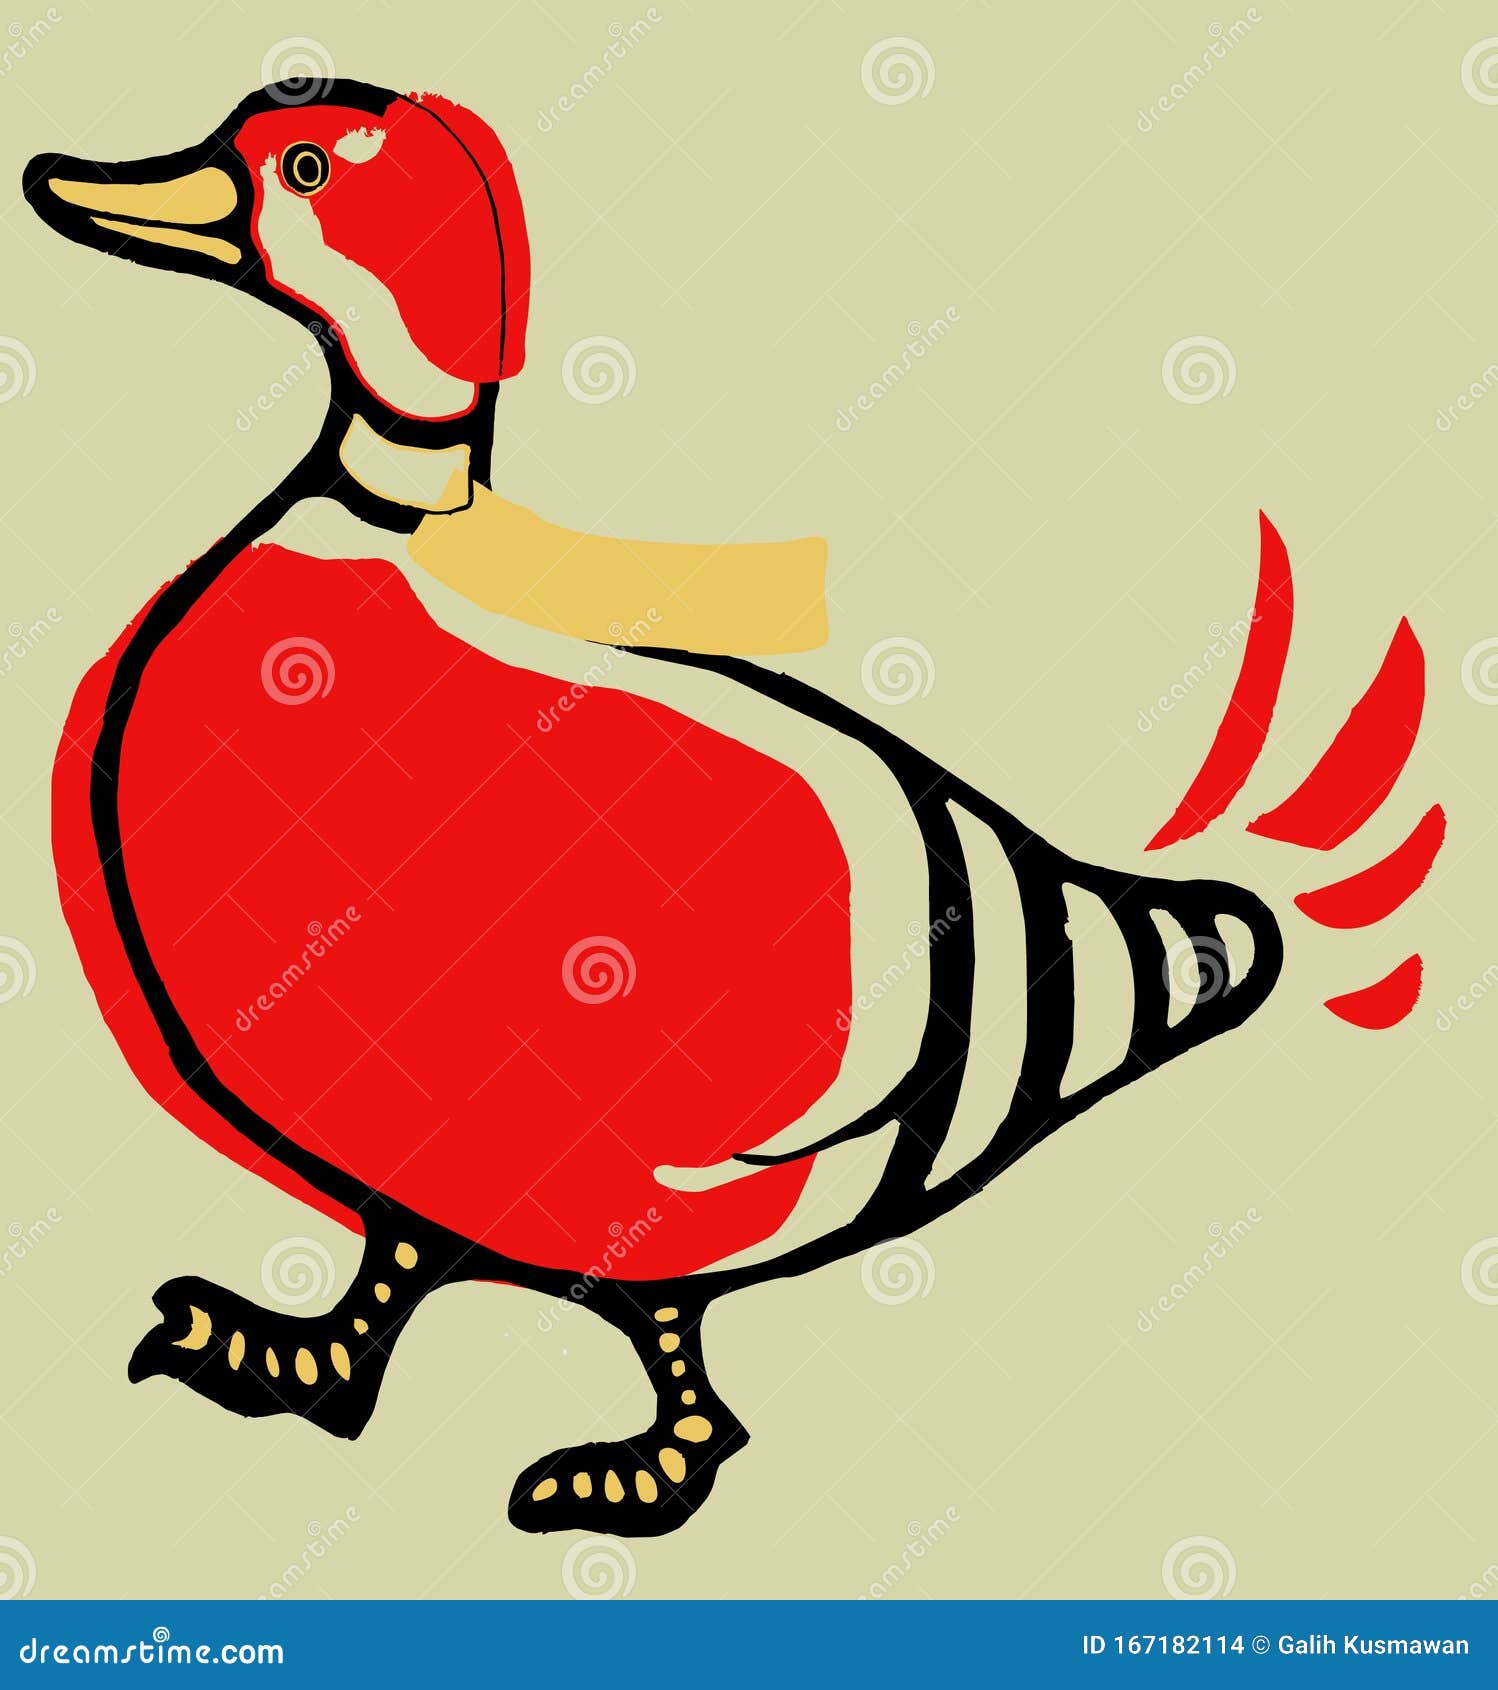 Beautiful Cartoon Illustration of Cute Red Duck with Separated Colour in  Grey  Stock Vector - Illustration of yellow, white: 167182114